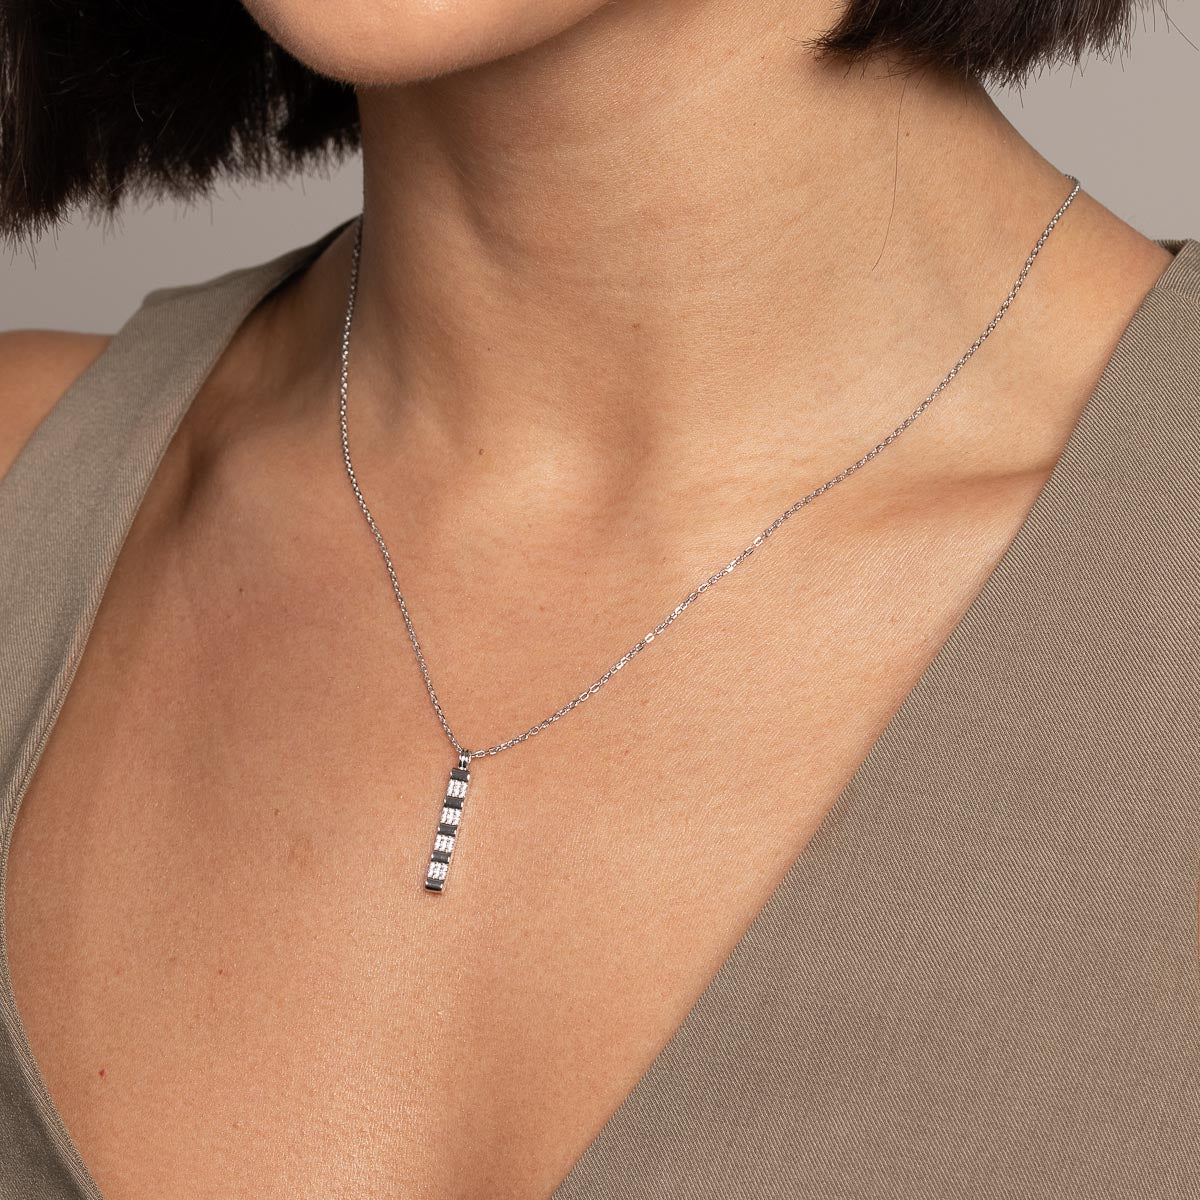 Pleated Crystal Pendant Necklace in Silver worn